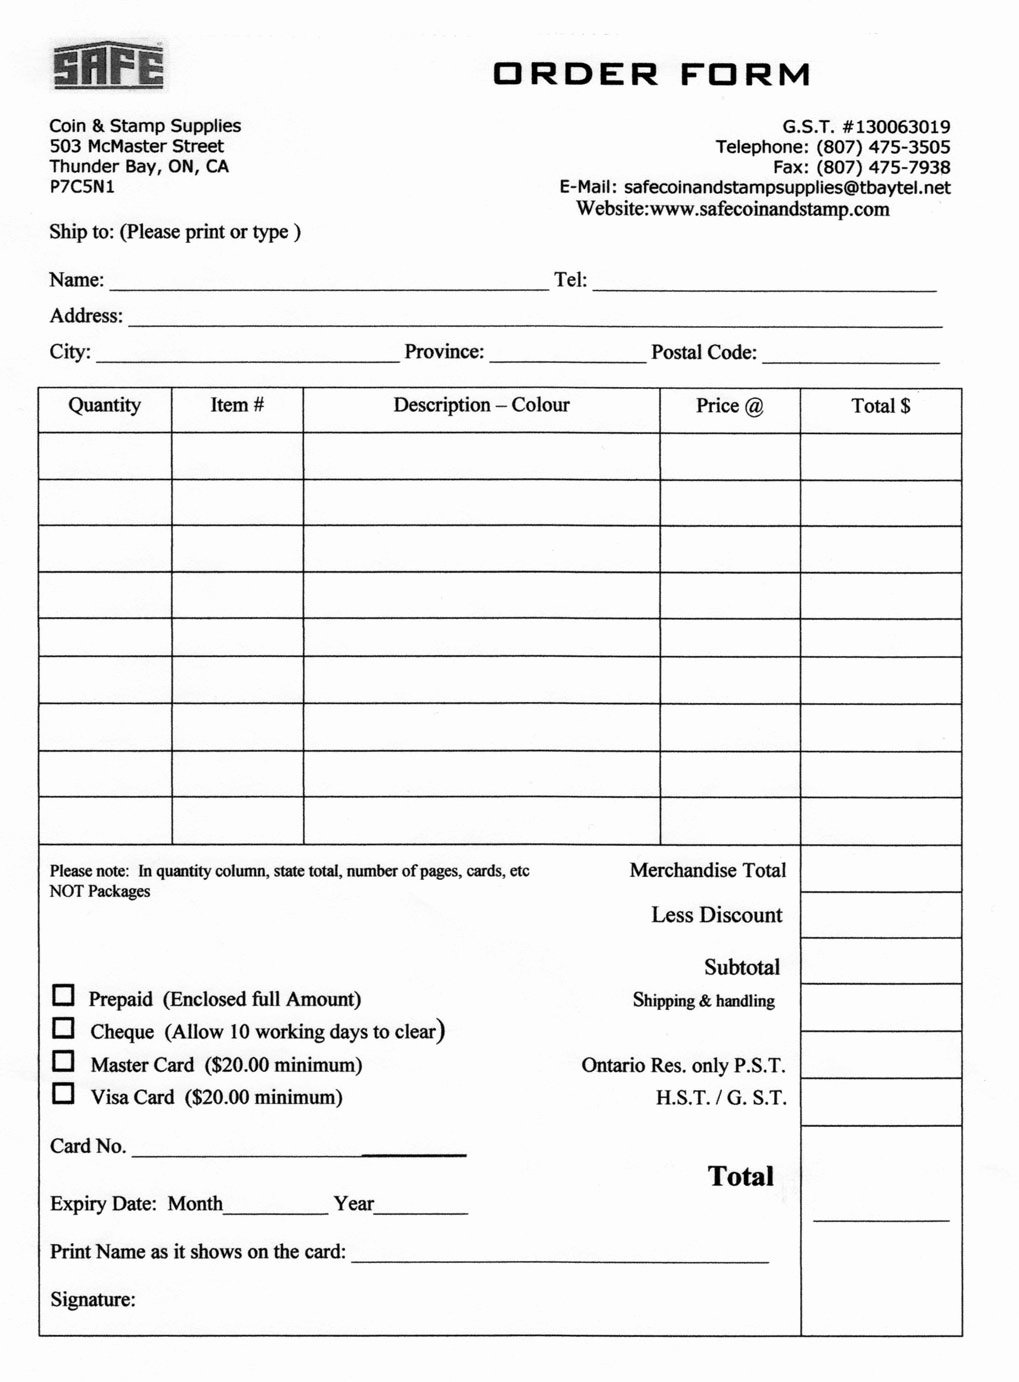 Blank order form Template Luxury Blank Purchase order form